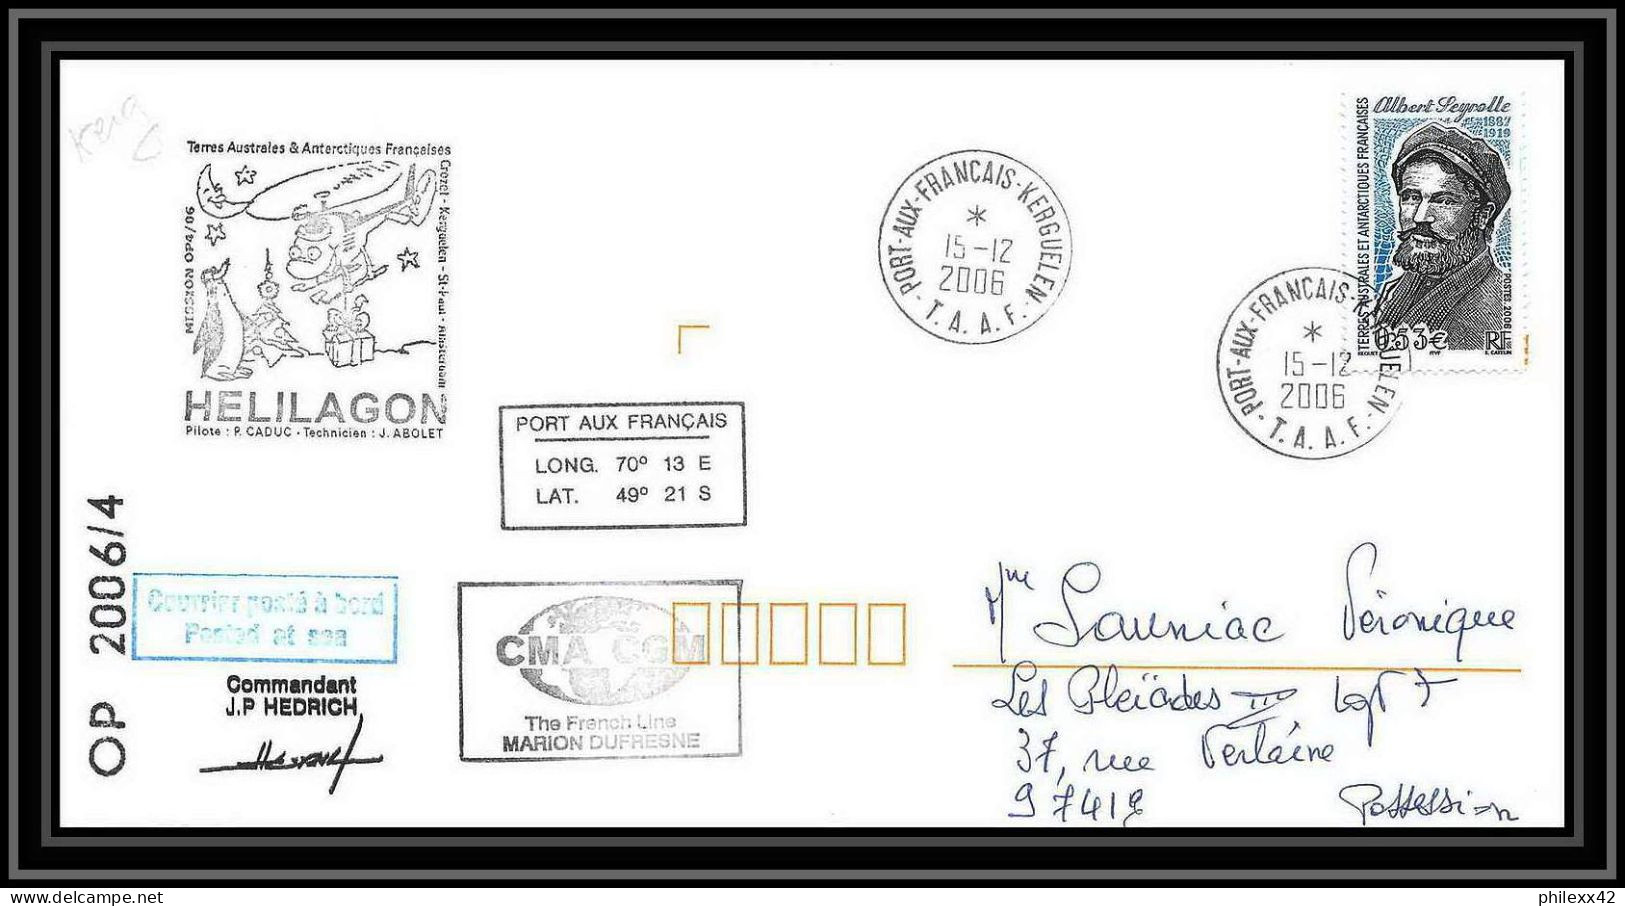 2630 ANTARCTIC Terres Australes TAAF Lettre Cover Dufresne 2 Signé Signed Op 2006/4 KERGUELEN 15/12/2006 N°437 Helilagon - Helicopters